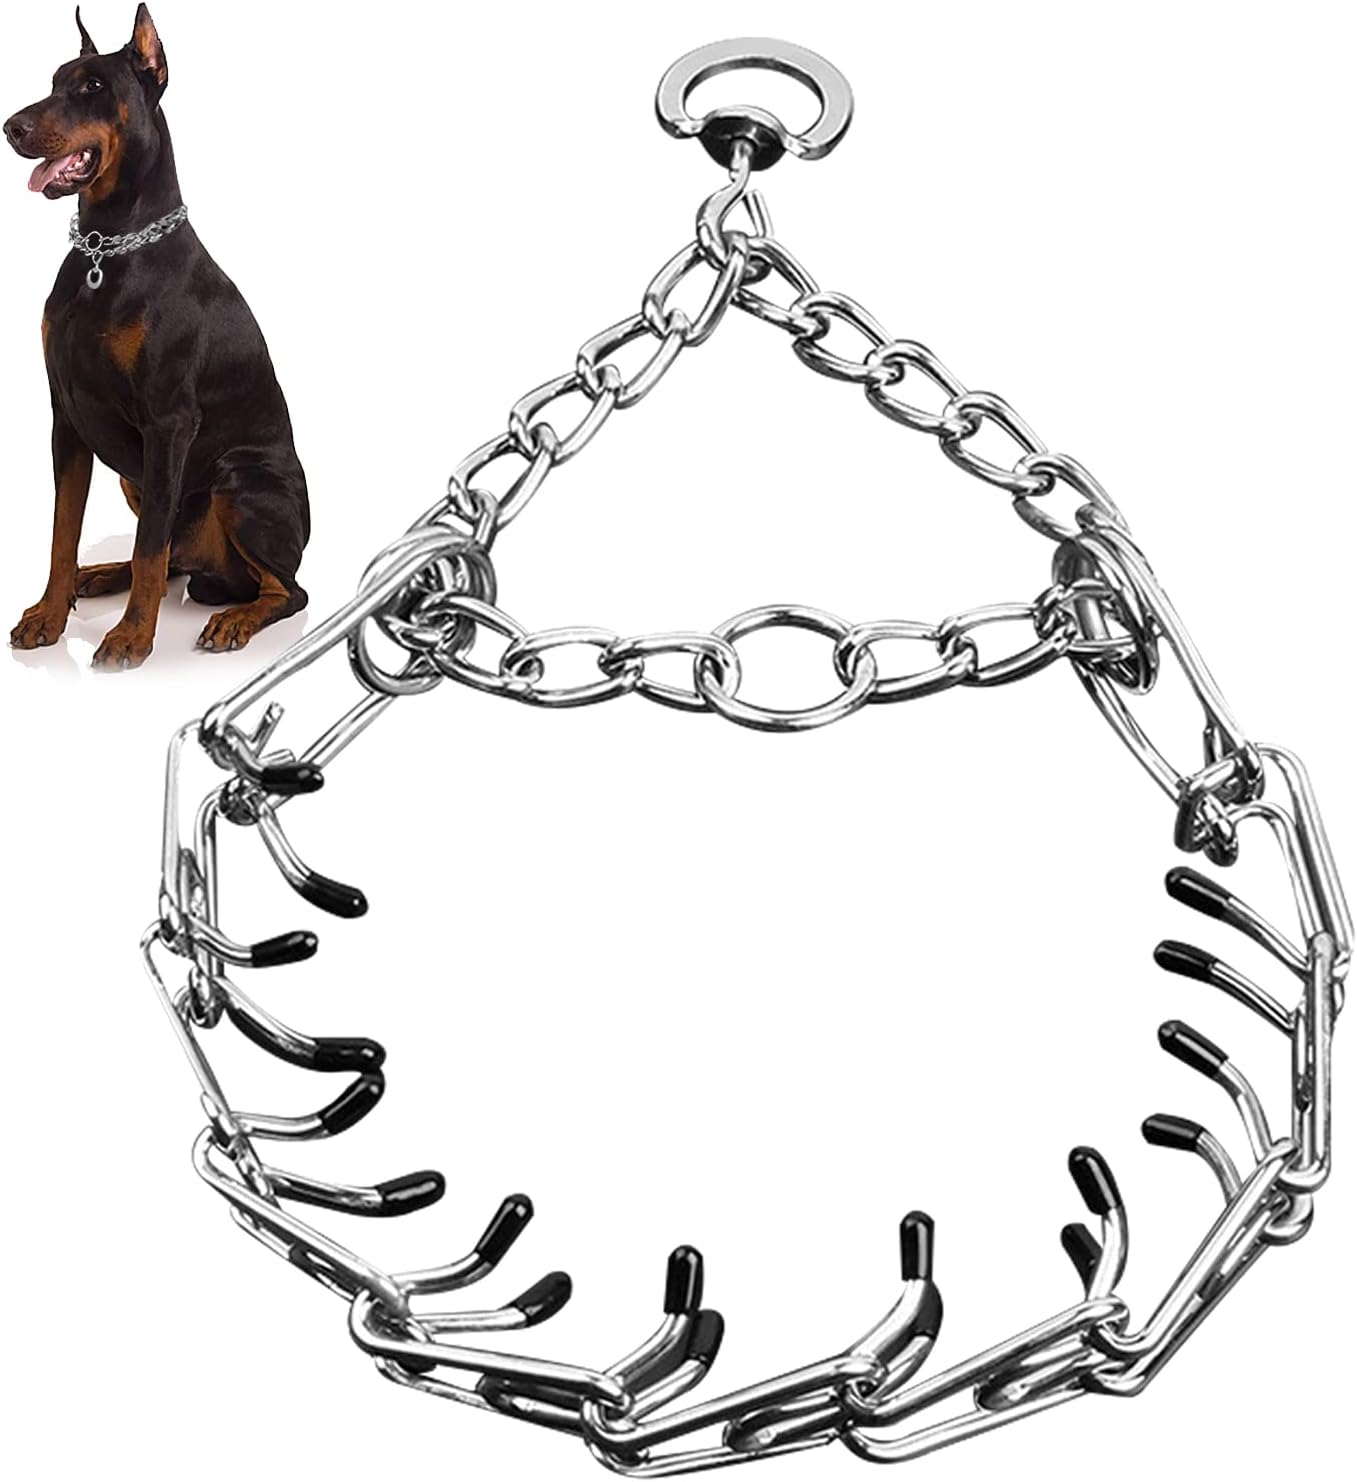 DogsStainless Steel Collar for Training Collar Tough and Durable efficient Training Adjustable and Removable Link Buckle with Comfortable Rubber tip S